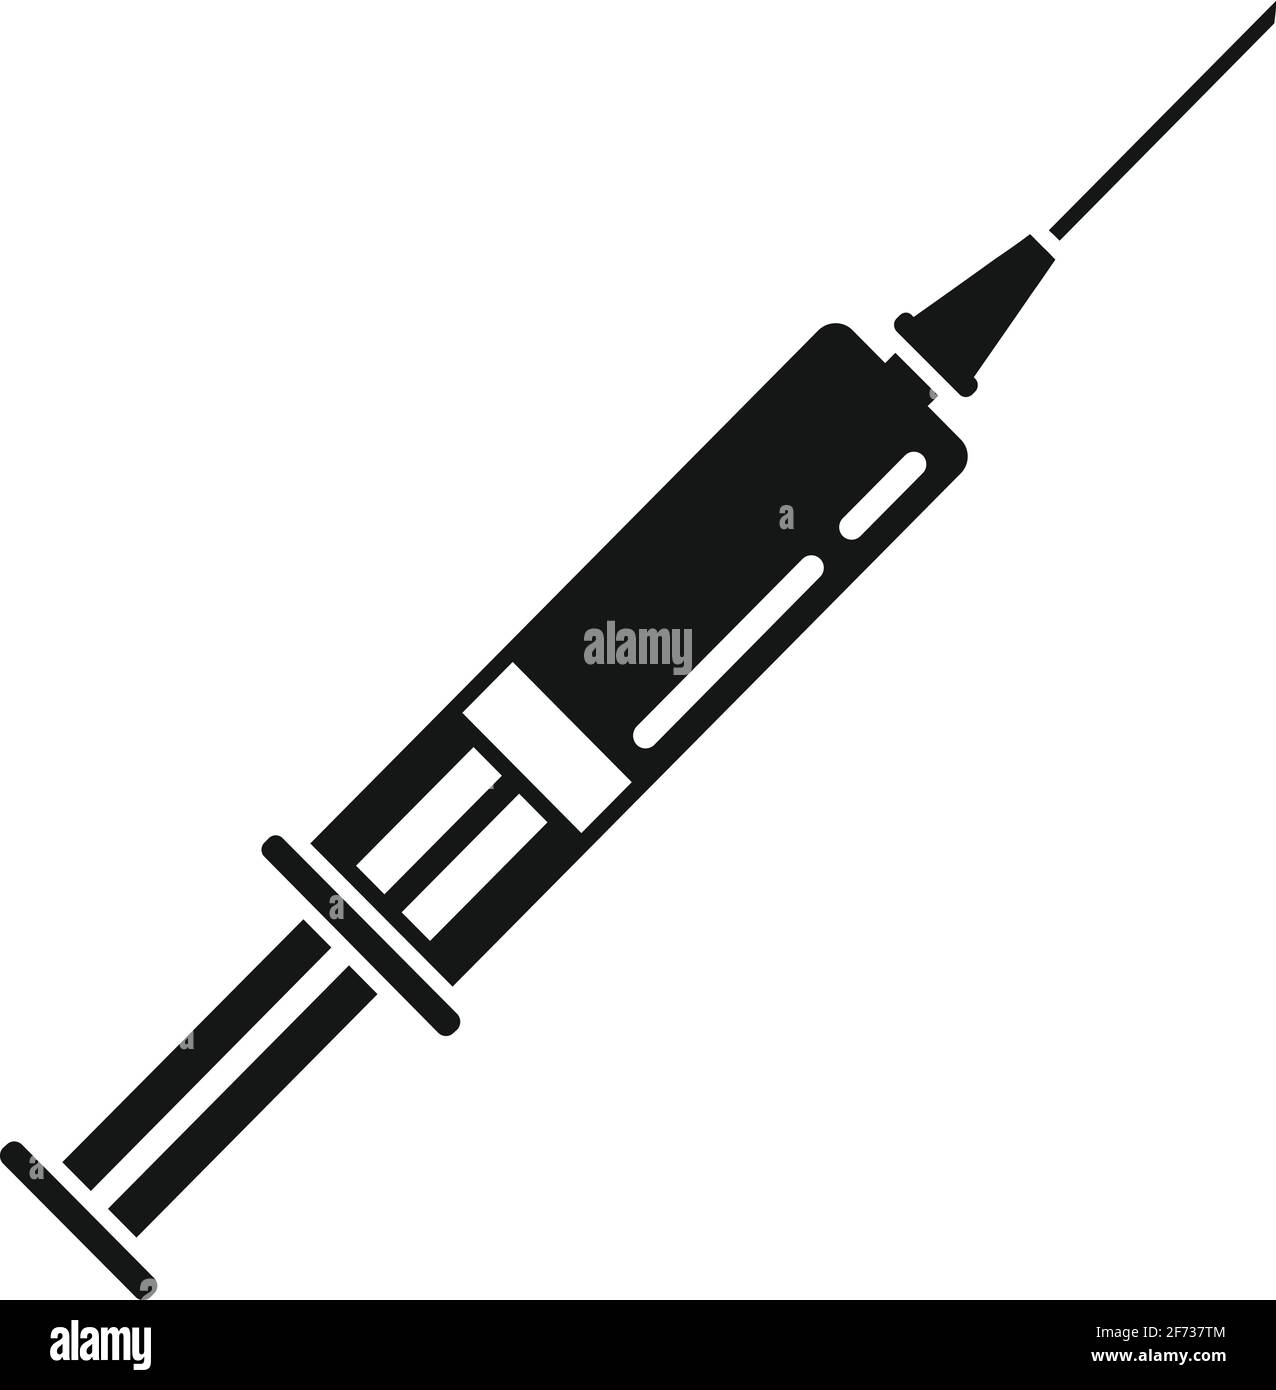 Measles syringe icon, simple style Stock Vector